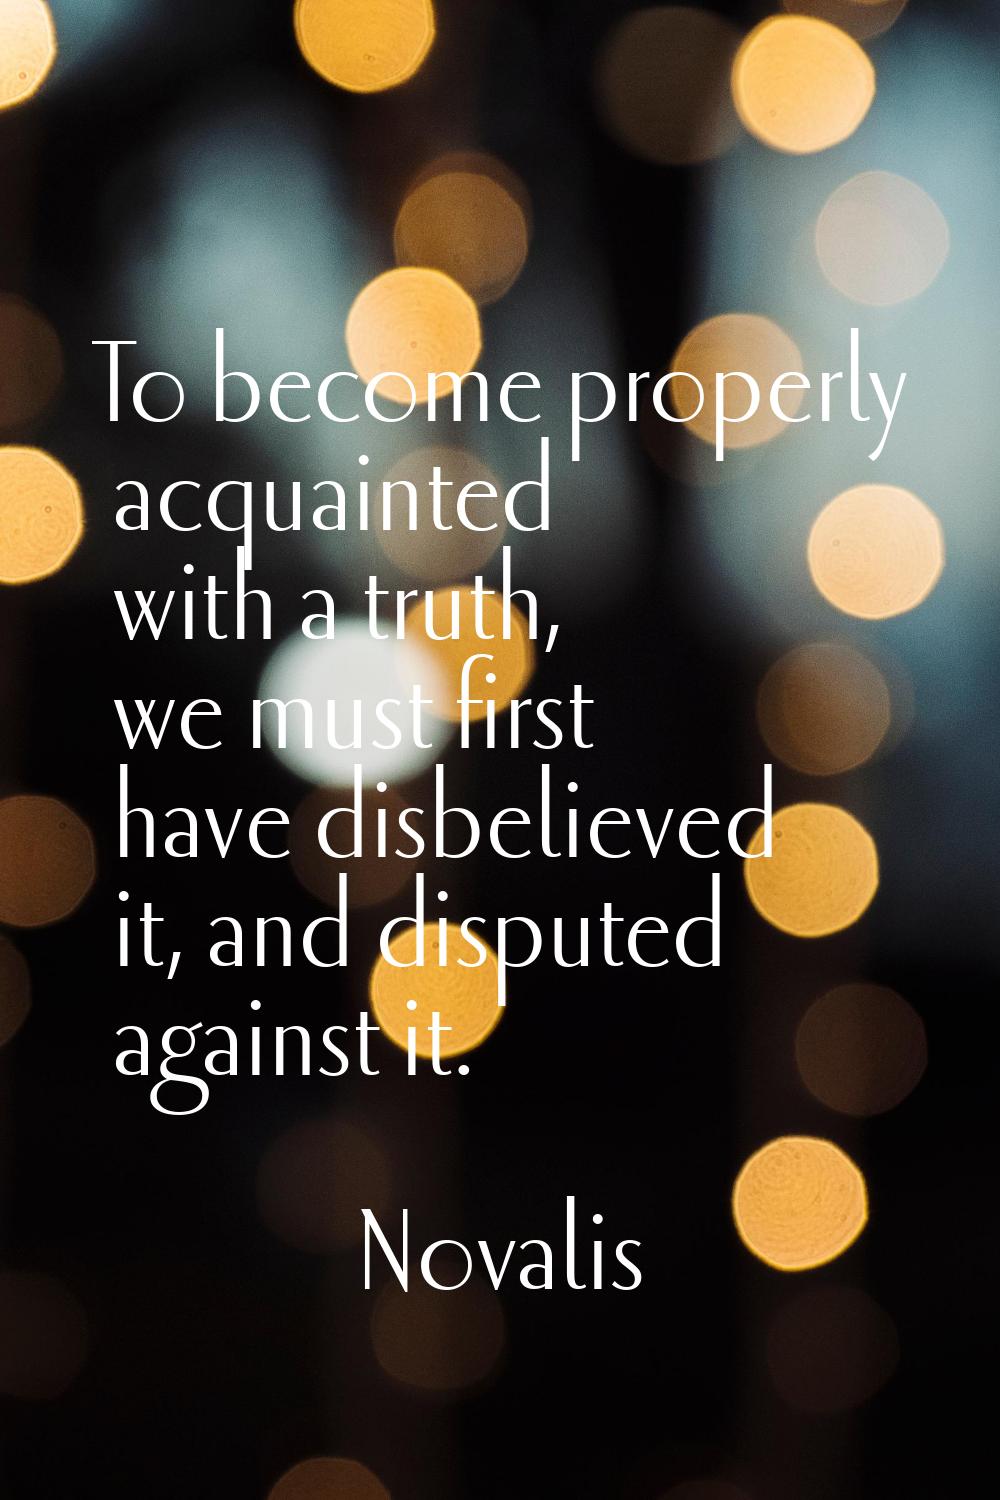 To become properly acquainted with a truth, we must first have disbelieved it, and disputed against